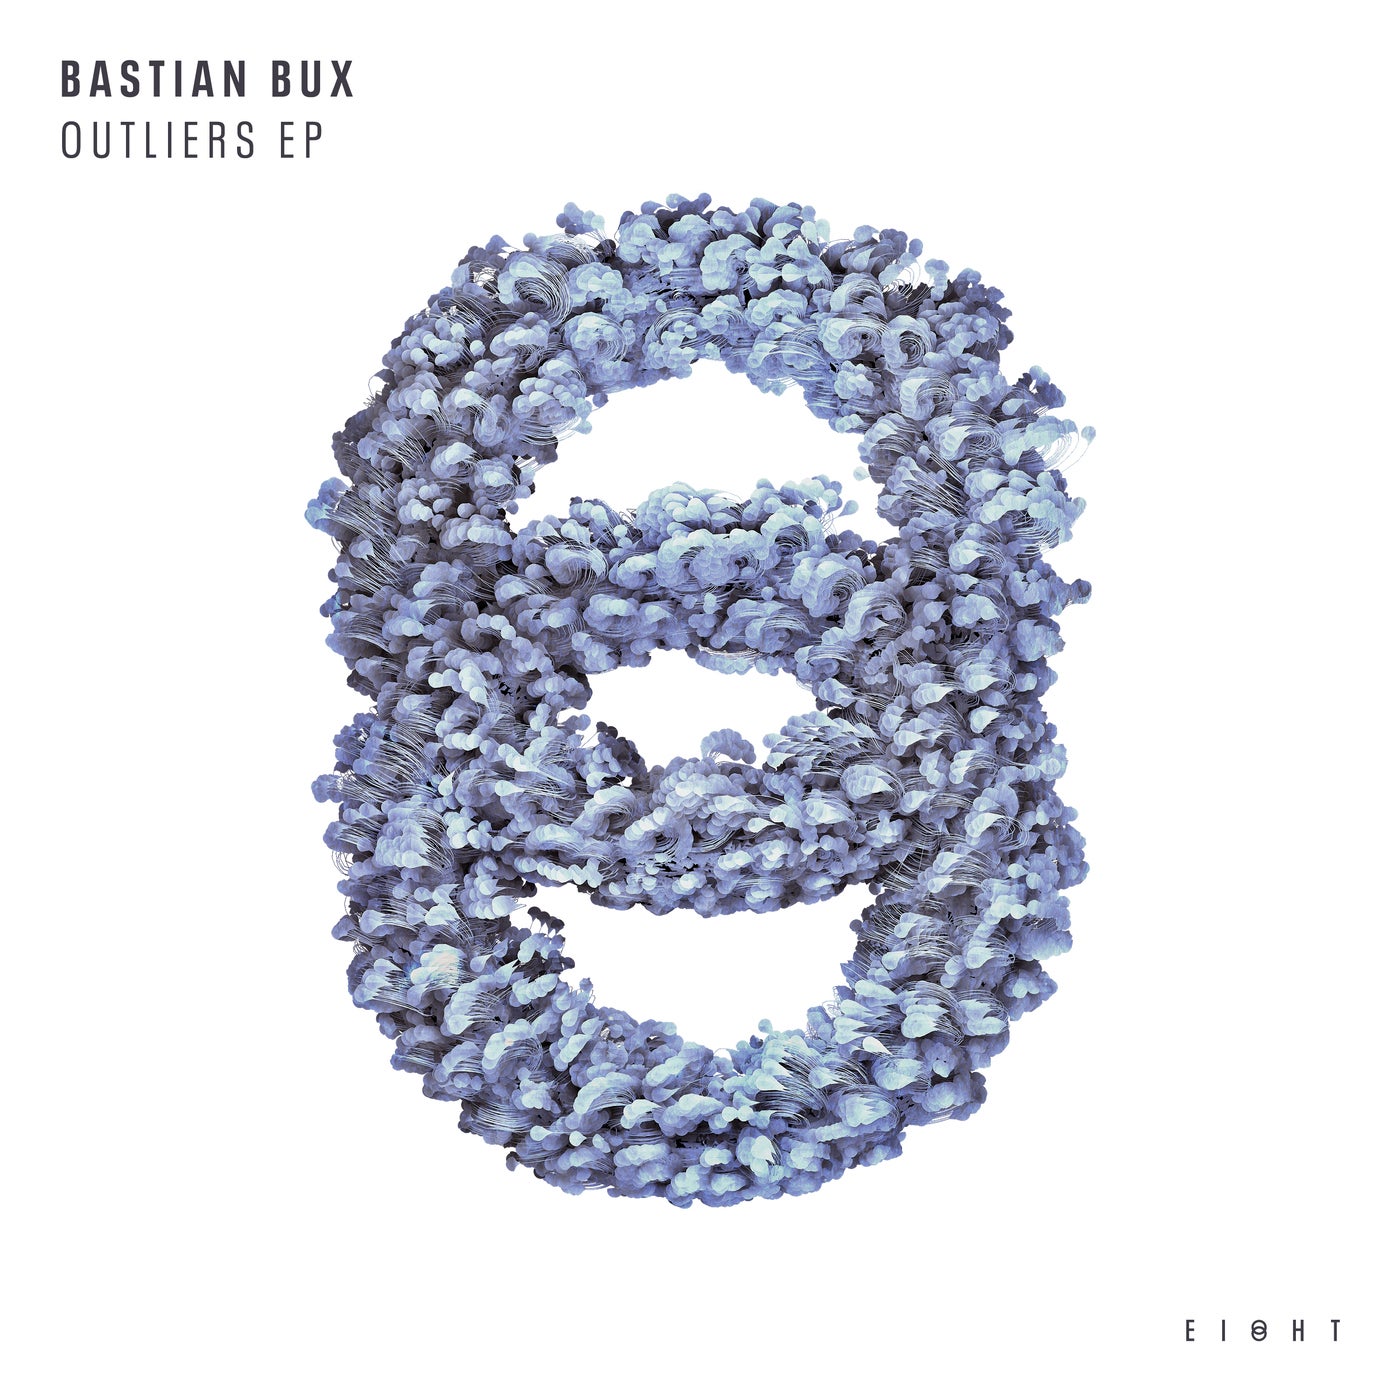 image cover: Bastian Bux - Outliers EP / EI8HT021